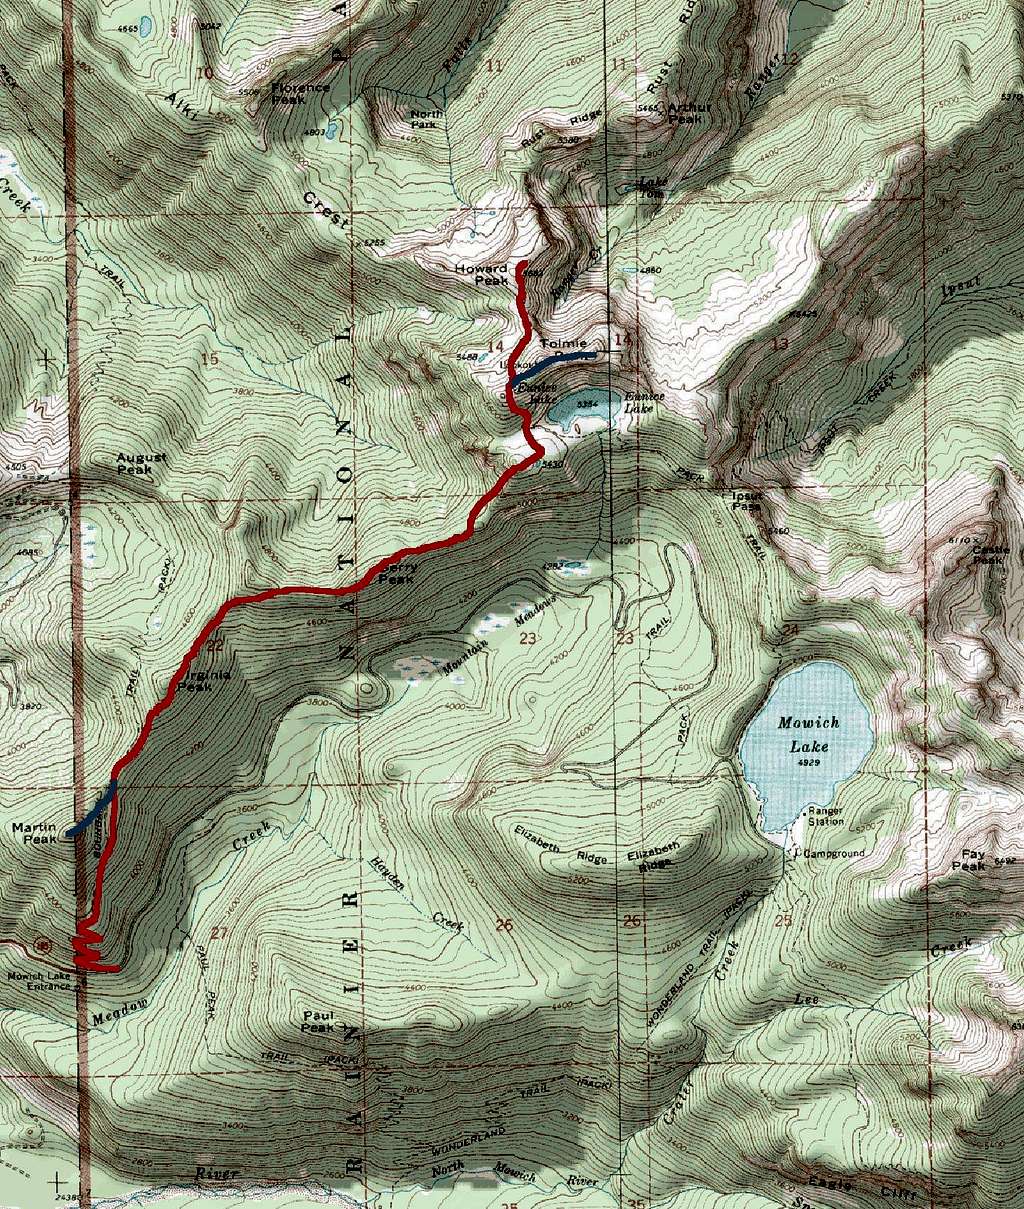 Winter Route From Mowich Lake Park Boundary